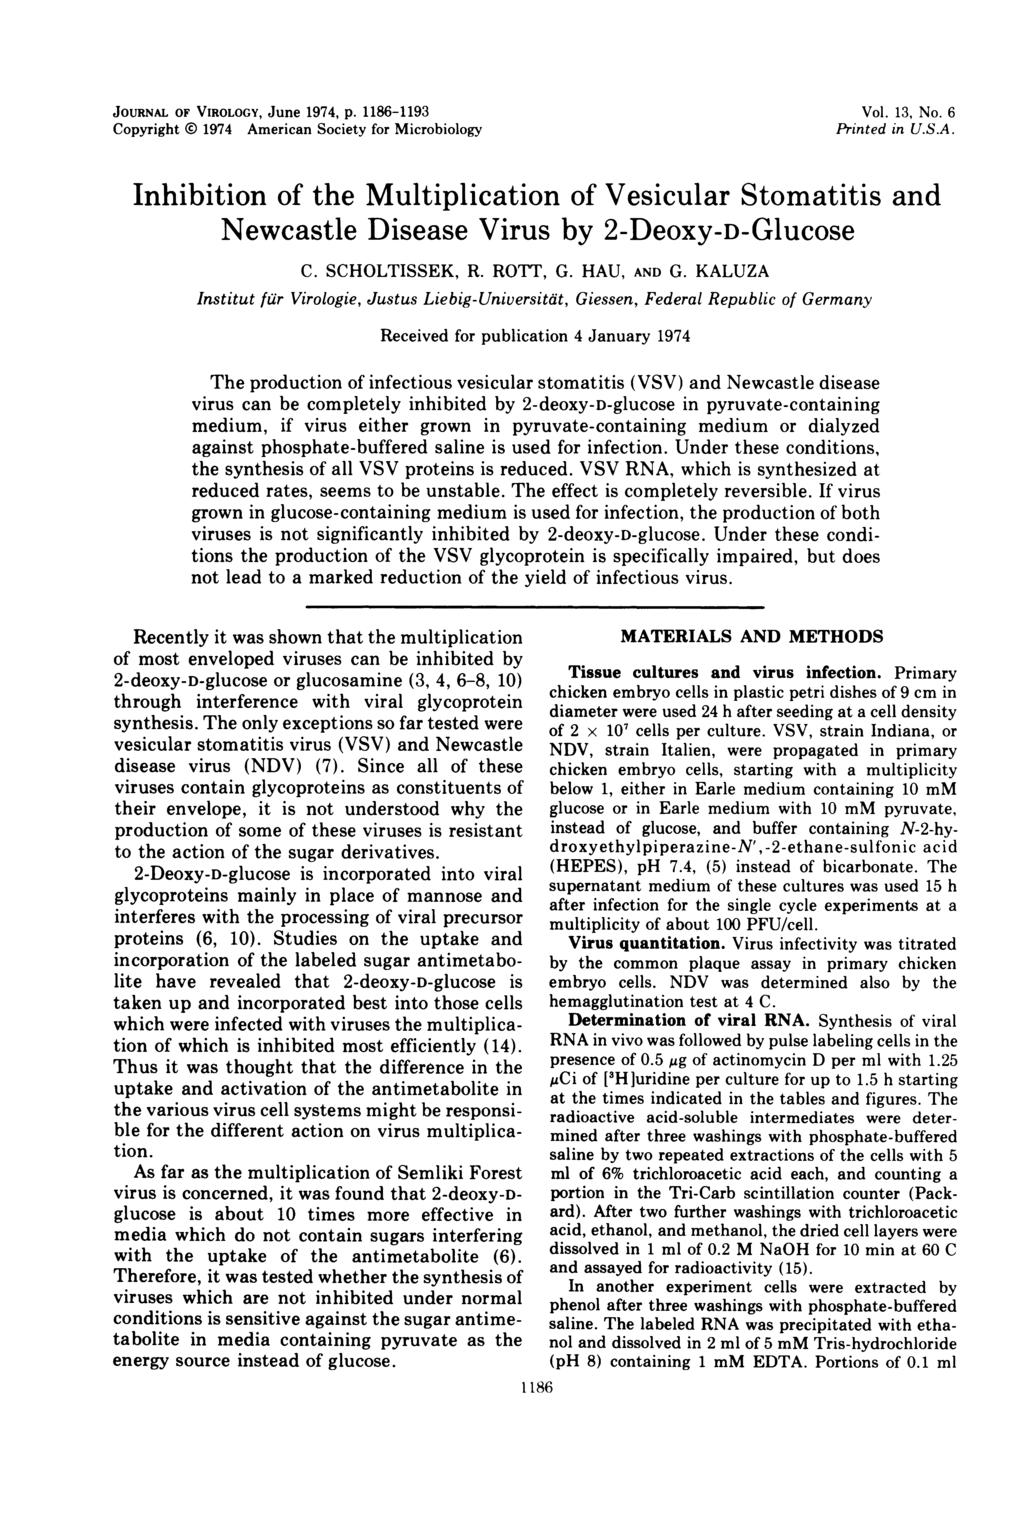 JOURNAL OF VIROLOGY, June 1974, p. 1186-1193 Copyright 1974 American Society for Microbiology Vol. 13, No. 6 Printed in U.S.A. Inhibition of the Multiplication of Vesicular Stomatitis and Newcastle Disease Virus by 2-Deoxy-D-Glucose C.